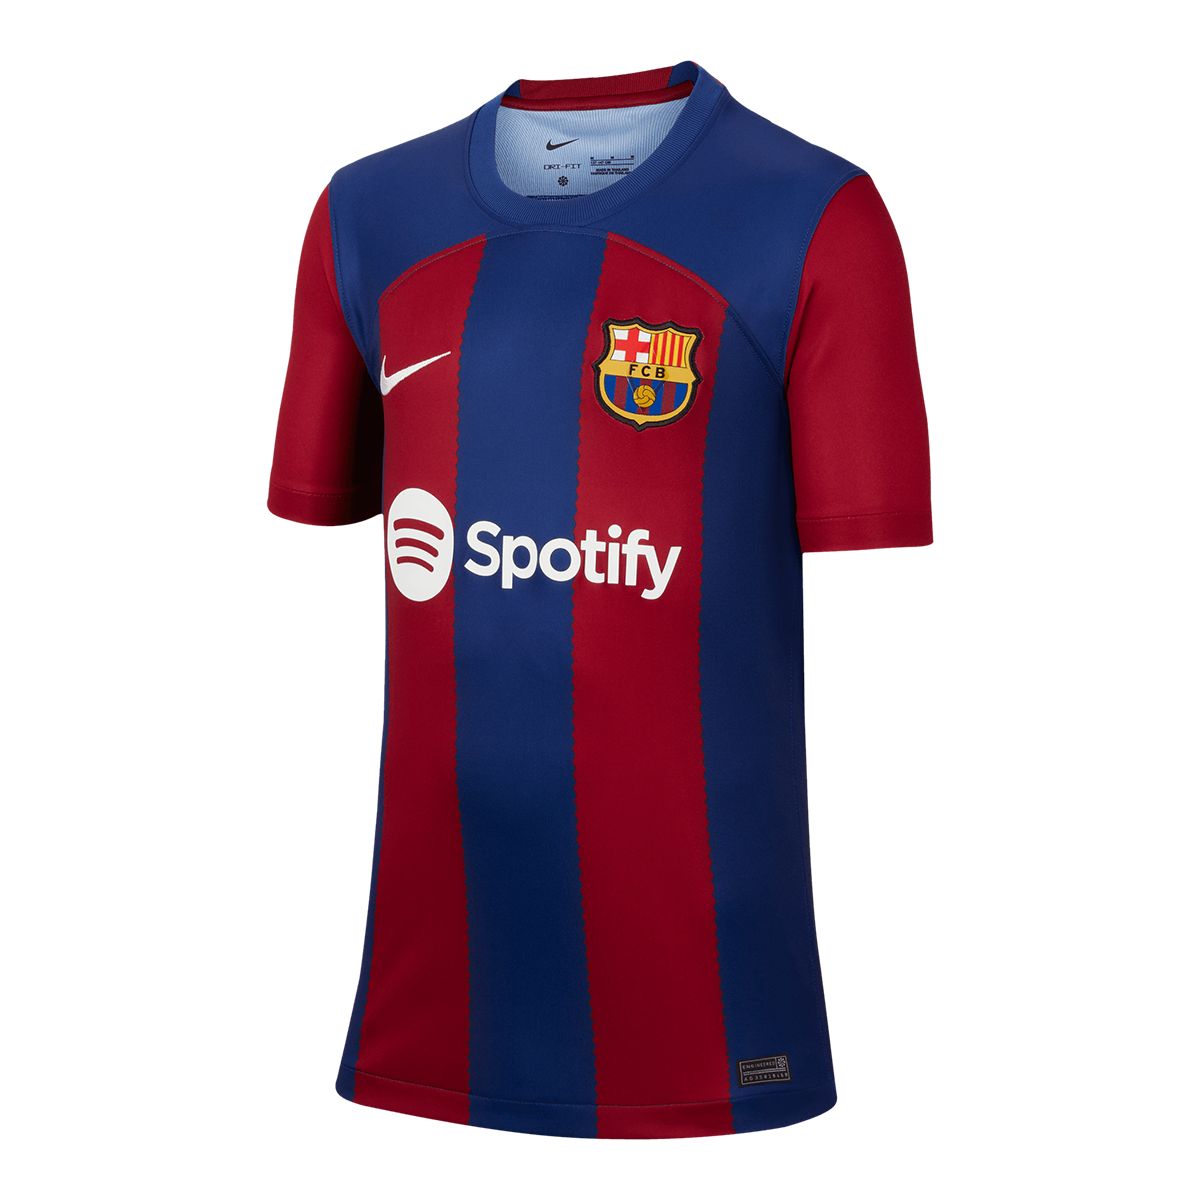 Image of Youth FC Barcelona Nike Replica Jersey